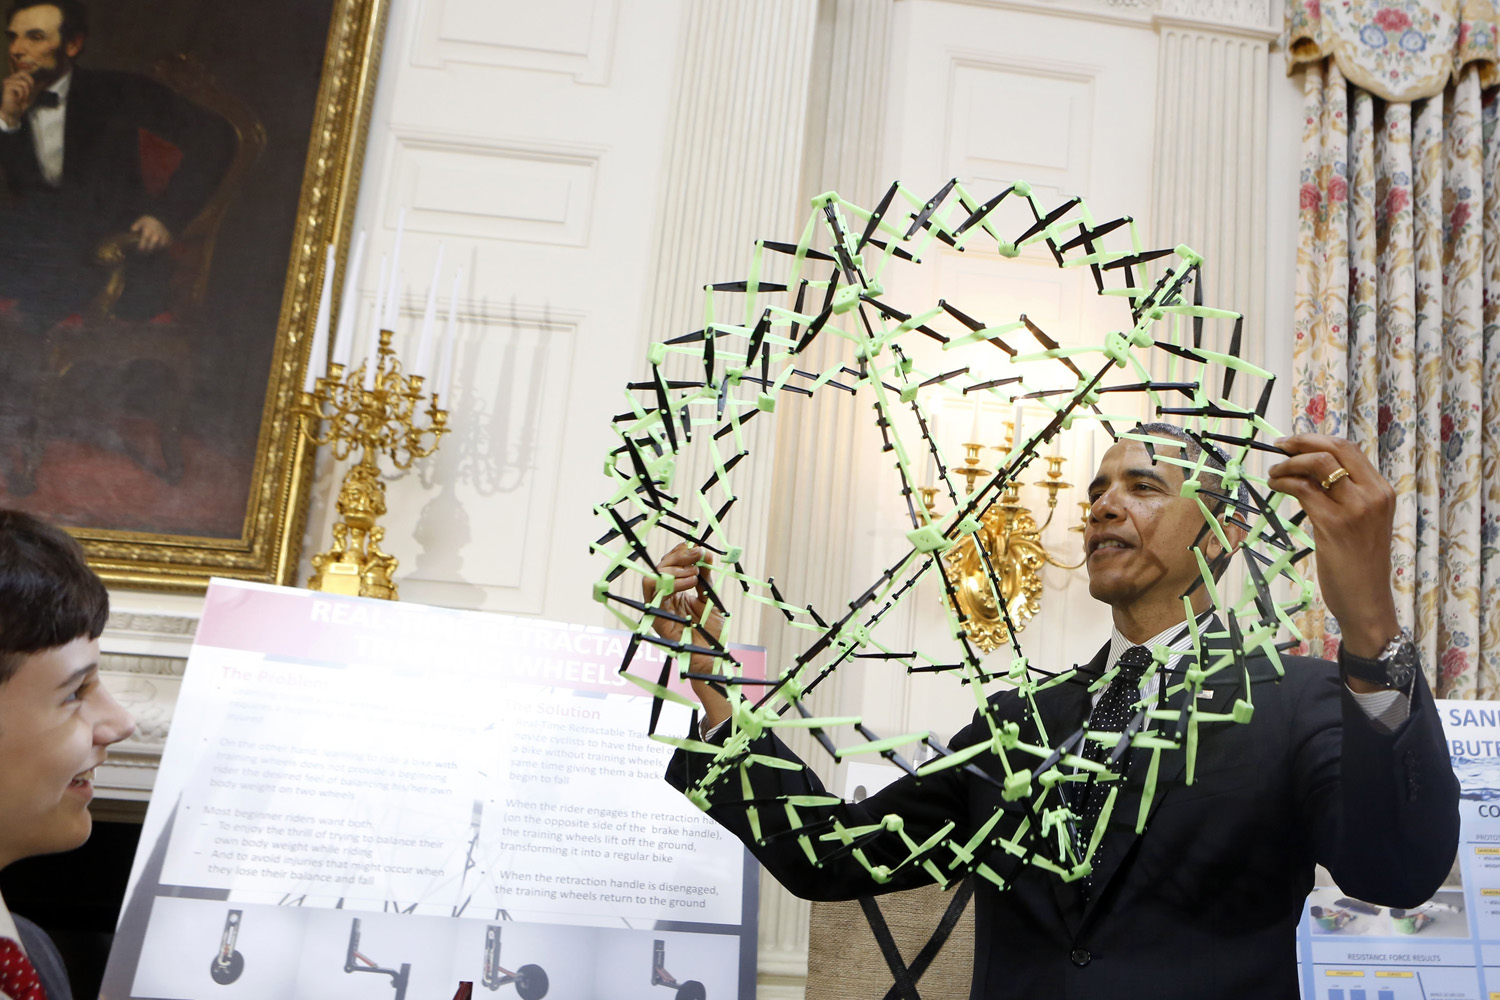 U.S. President Barack Obama looks at the project of Peyton Roberston (left) from Ft. Lauderdale, Fla., winner of the Discovery 3M Young Scientist, for his "Sandless sand bags" project at the 2014 White House Science Fair in Washington, D.C., May 27, 2014.